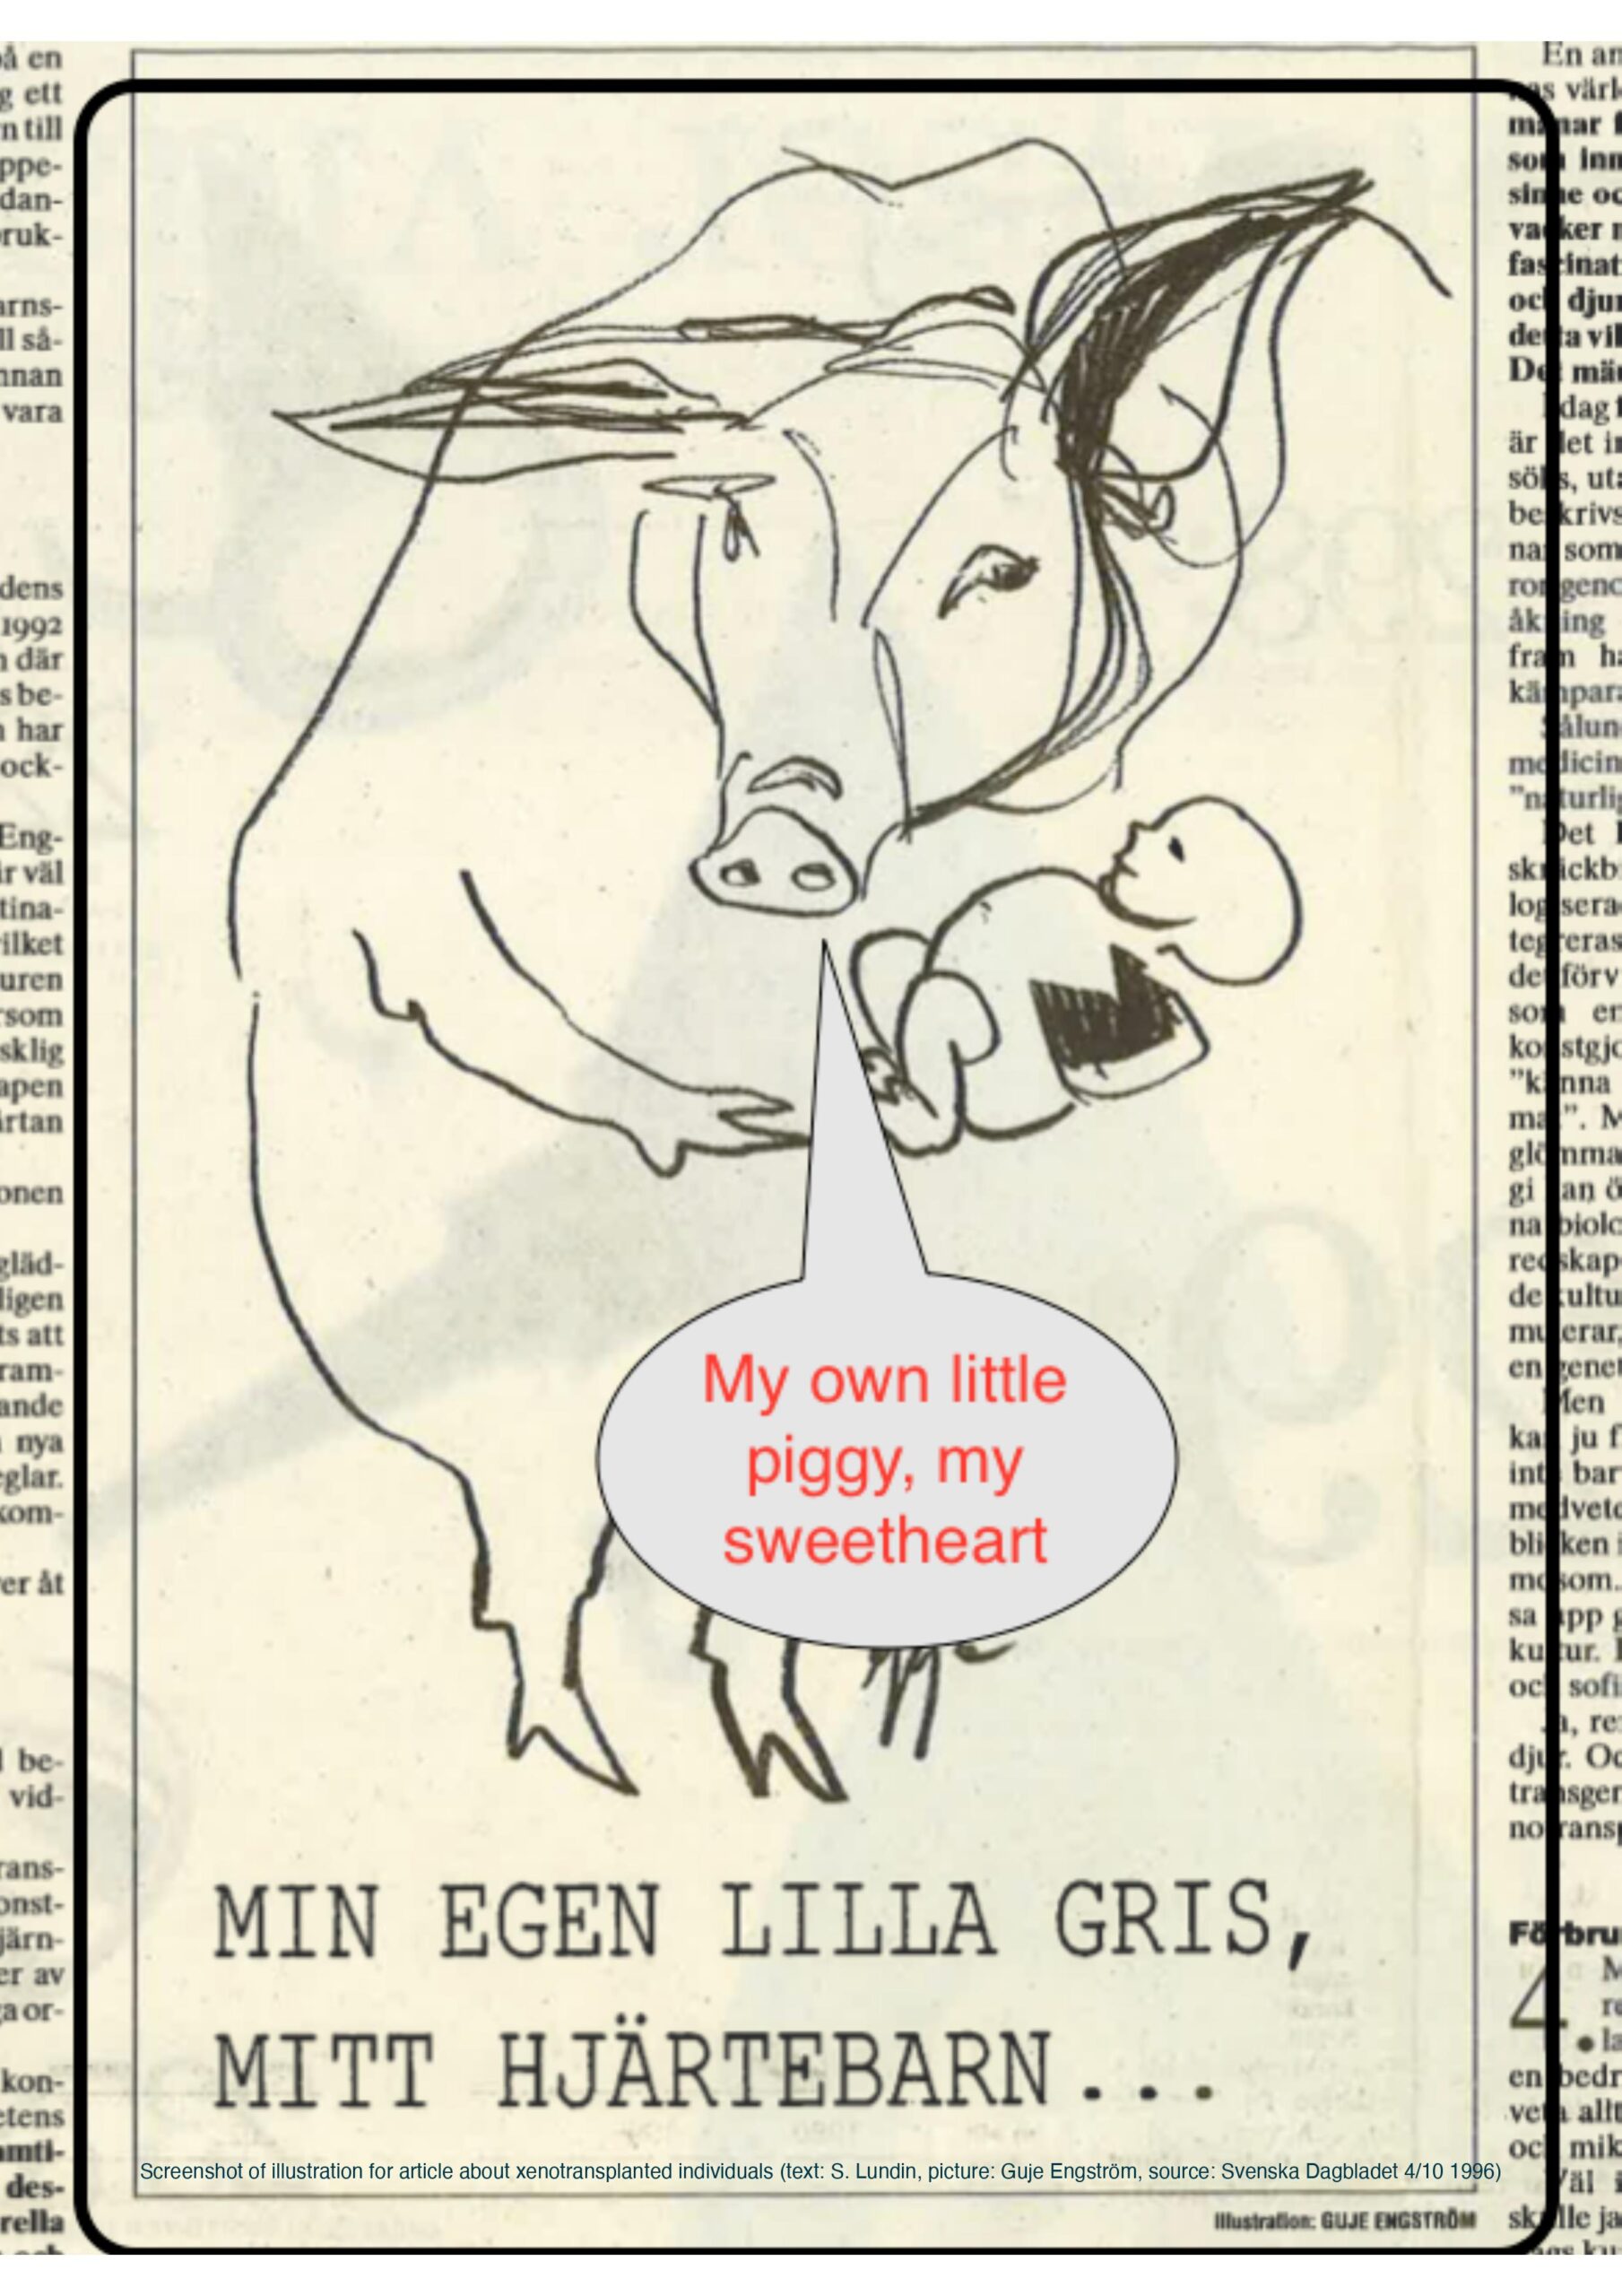 Lundin, Susanne - Ethnographic fieldwork among pigs and people. What can we learn from